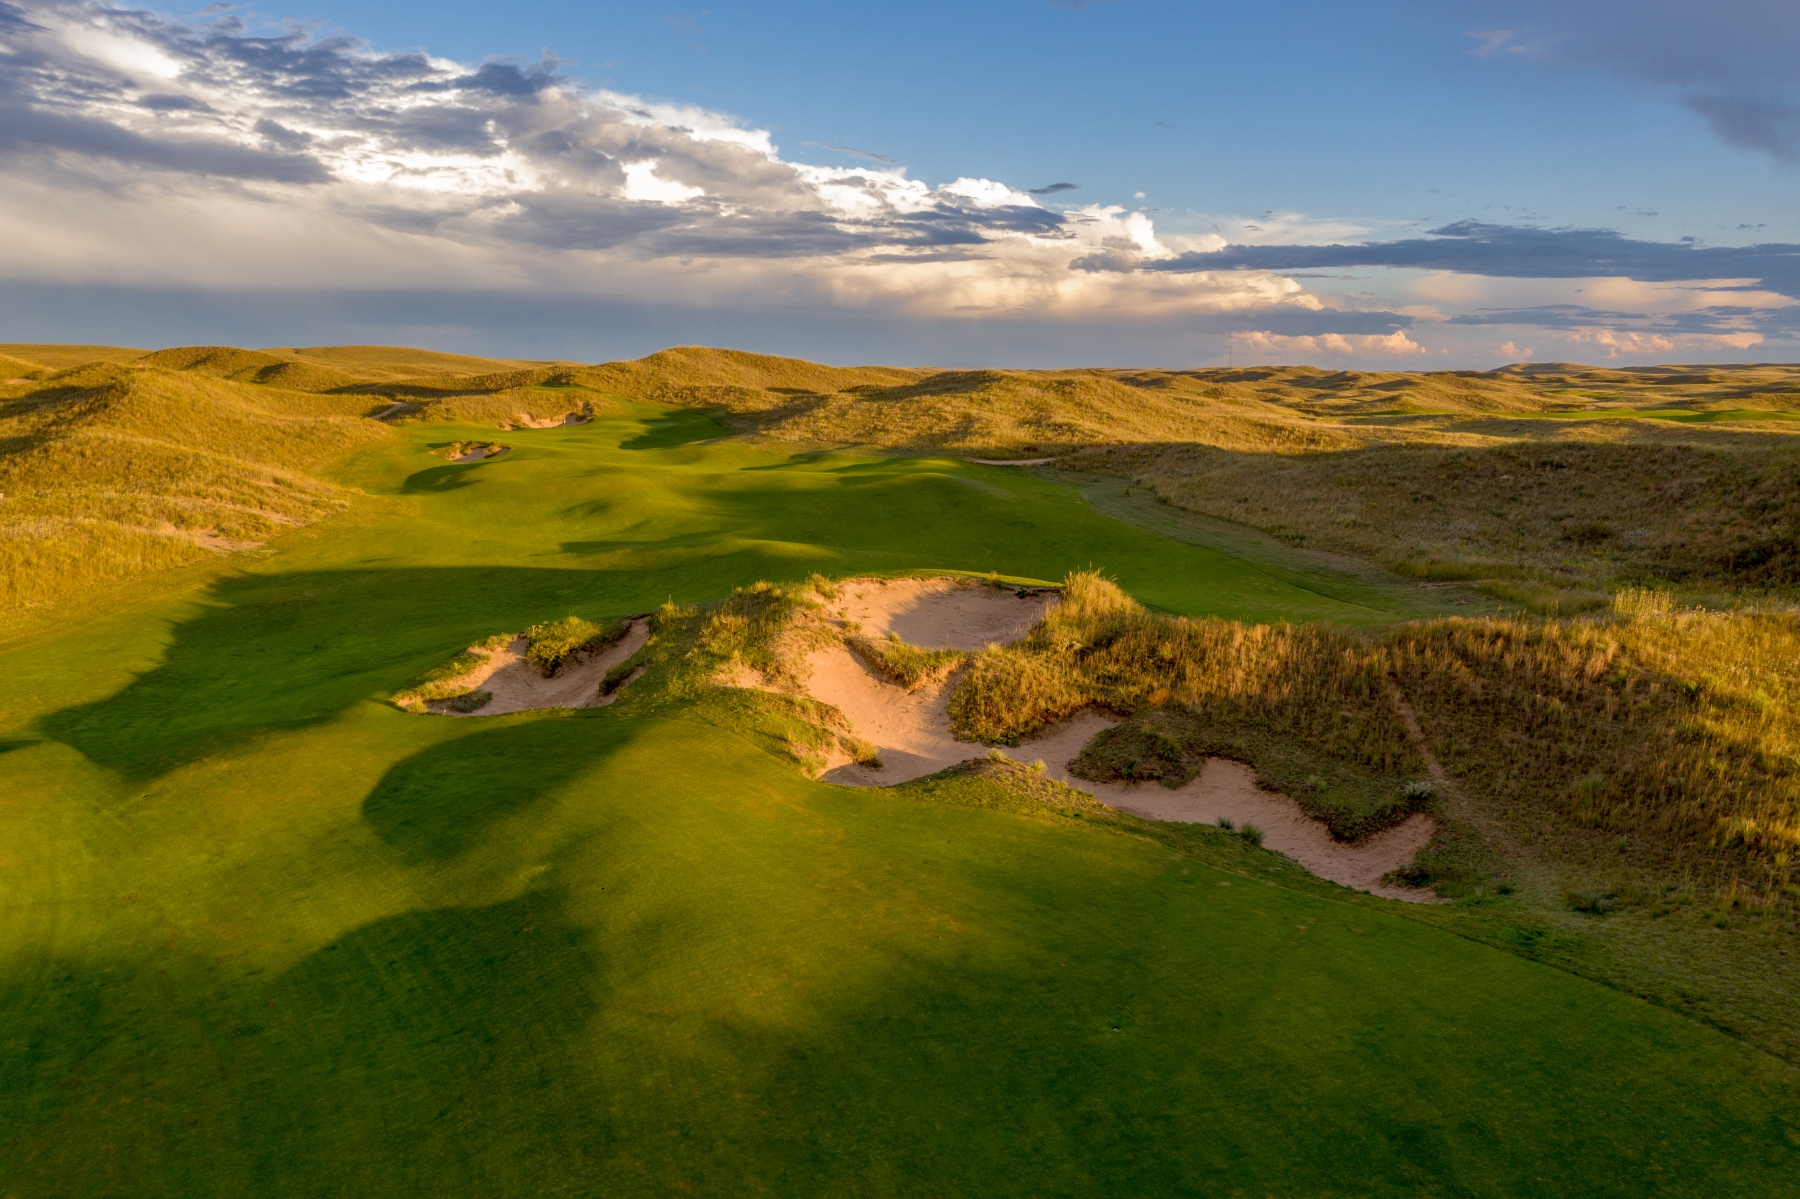 As the #1 golf course in Colorado, Ballyneal offers a unique golfing experience on natural sand dunes (source: Renaissance Golf Design).